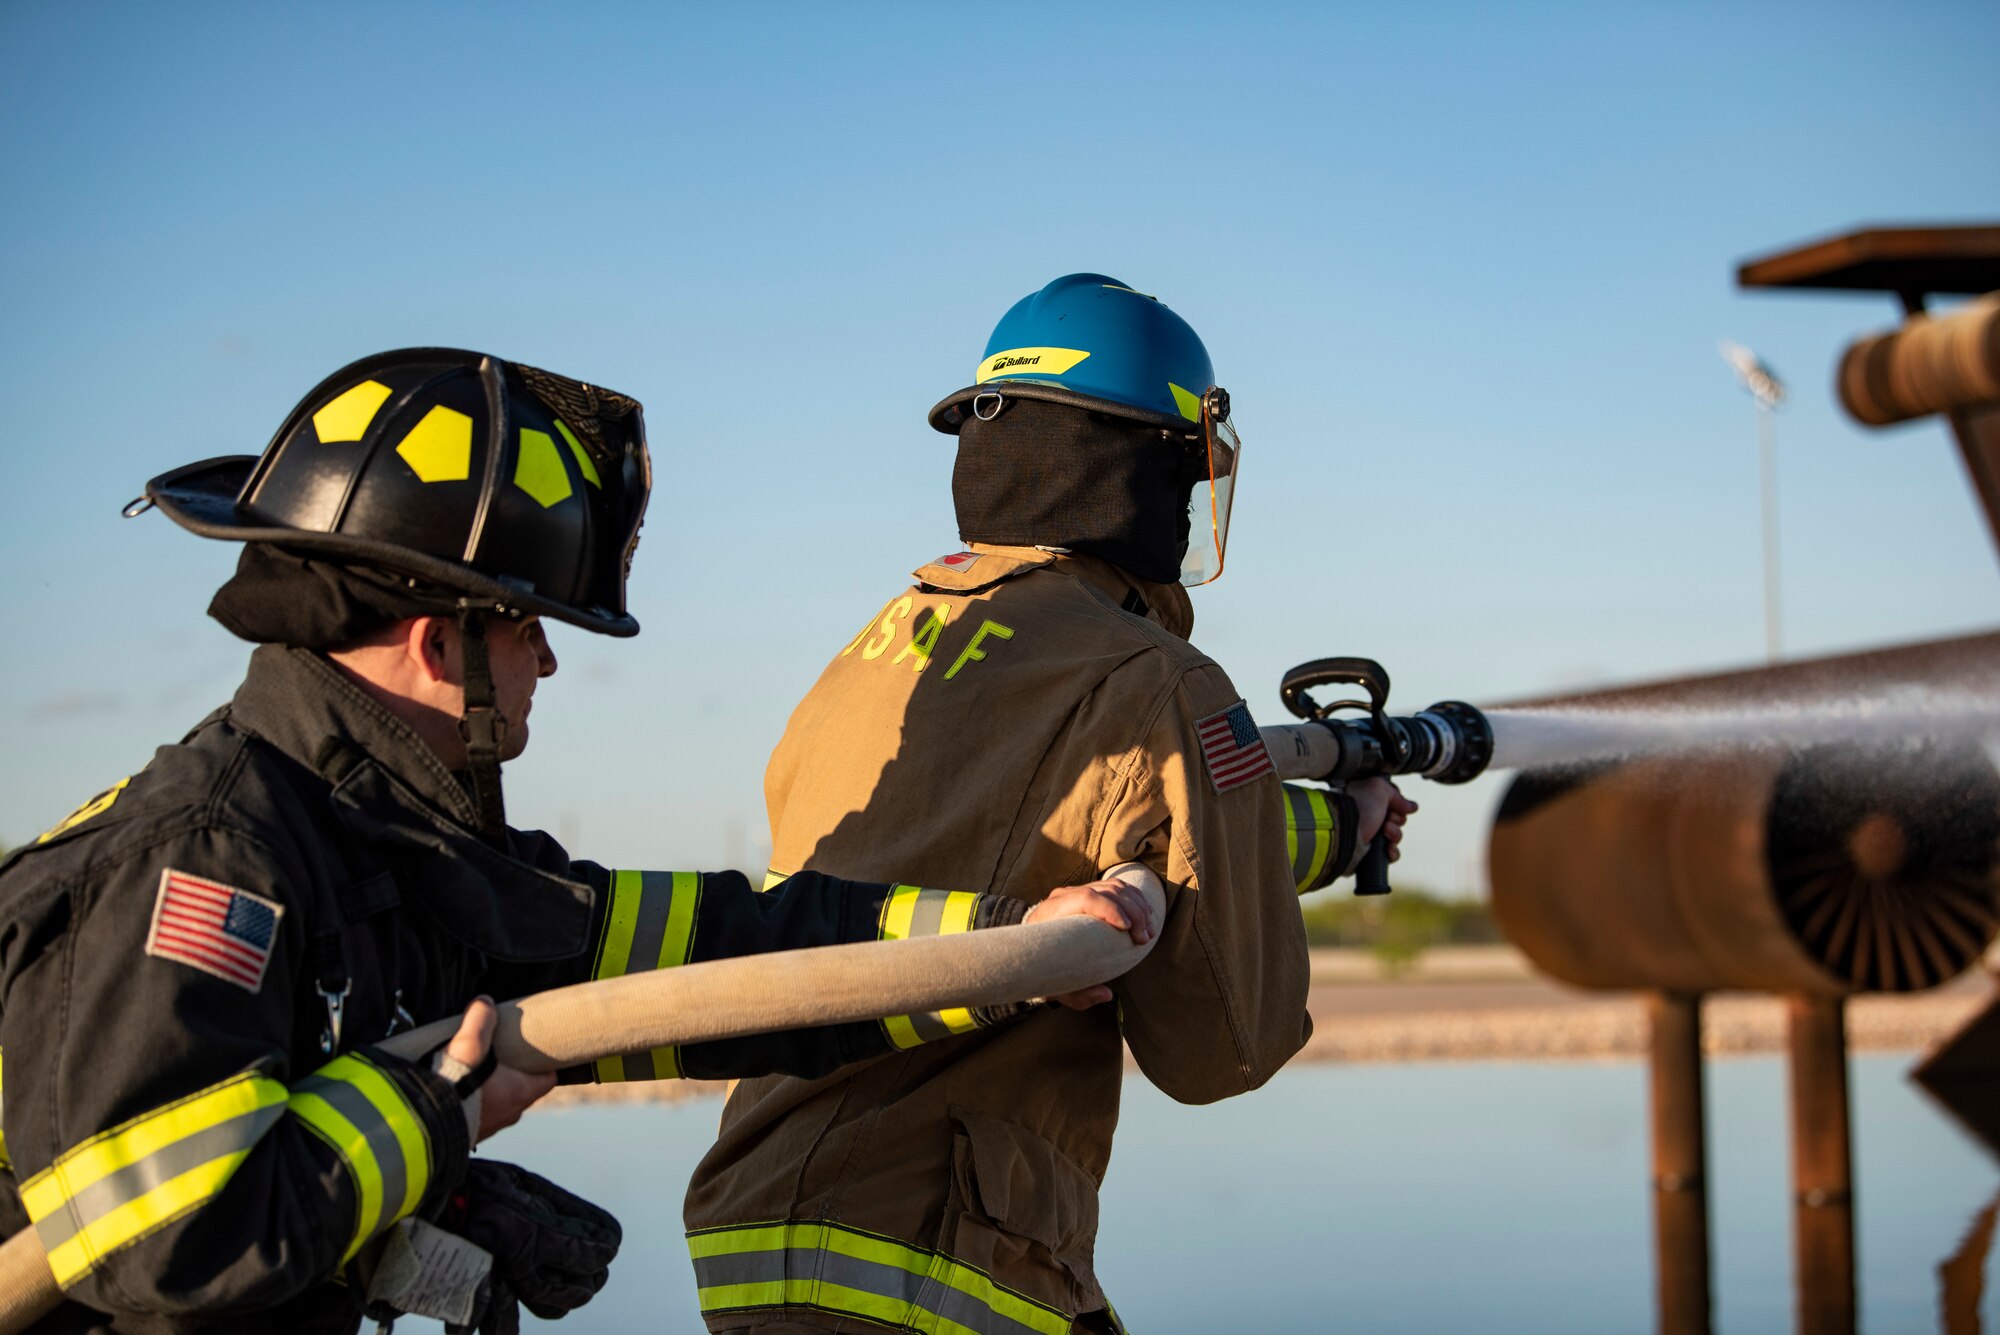 Senior Airman Jarrett Ziegler, 512th Civil Engineer Squadron firefighter, left, and Airman 1st Class Andrew Trujillo, 7th CES firefighter, test a firehose at Dyess Air Force Base, Texas, May 4, 2021. Zieglar and Trujillo conducted a routine function test of the firehose to ensure it was operating properly before conducting an aircraft fire training. (U.S. Air Force photo by Airman 1st Class Colin Hollowell)